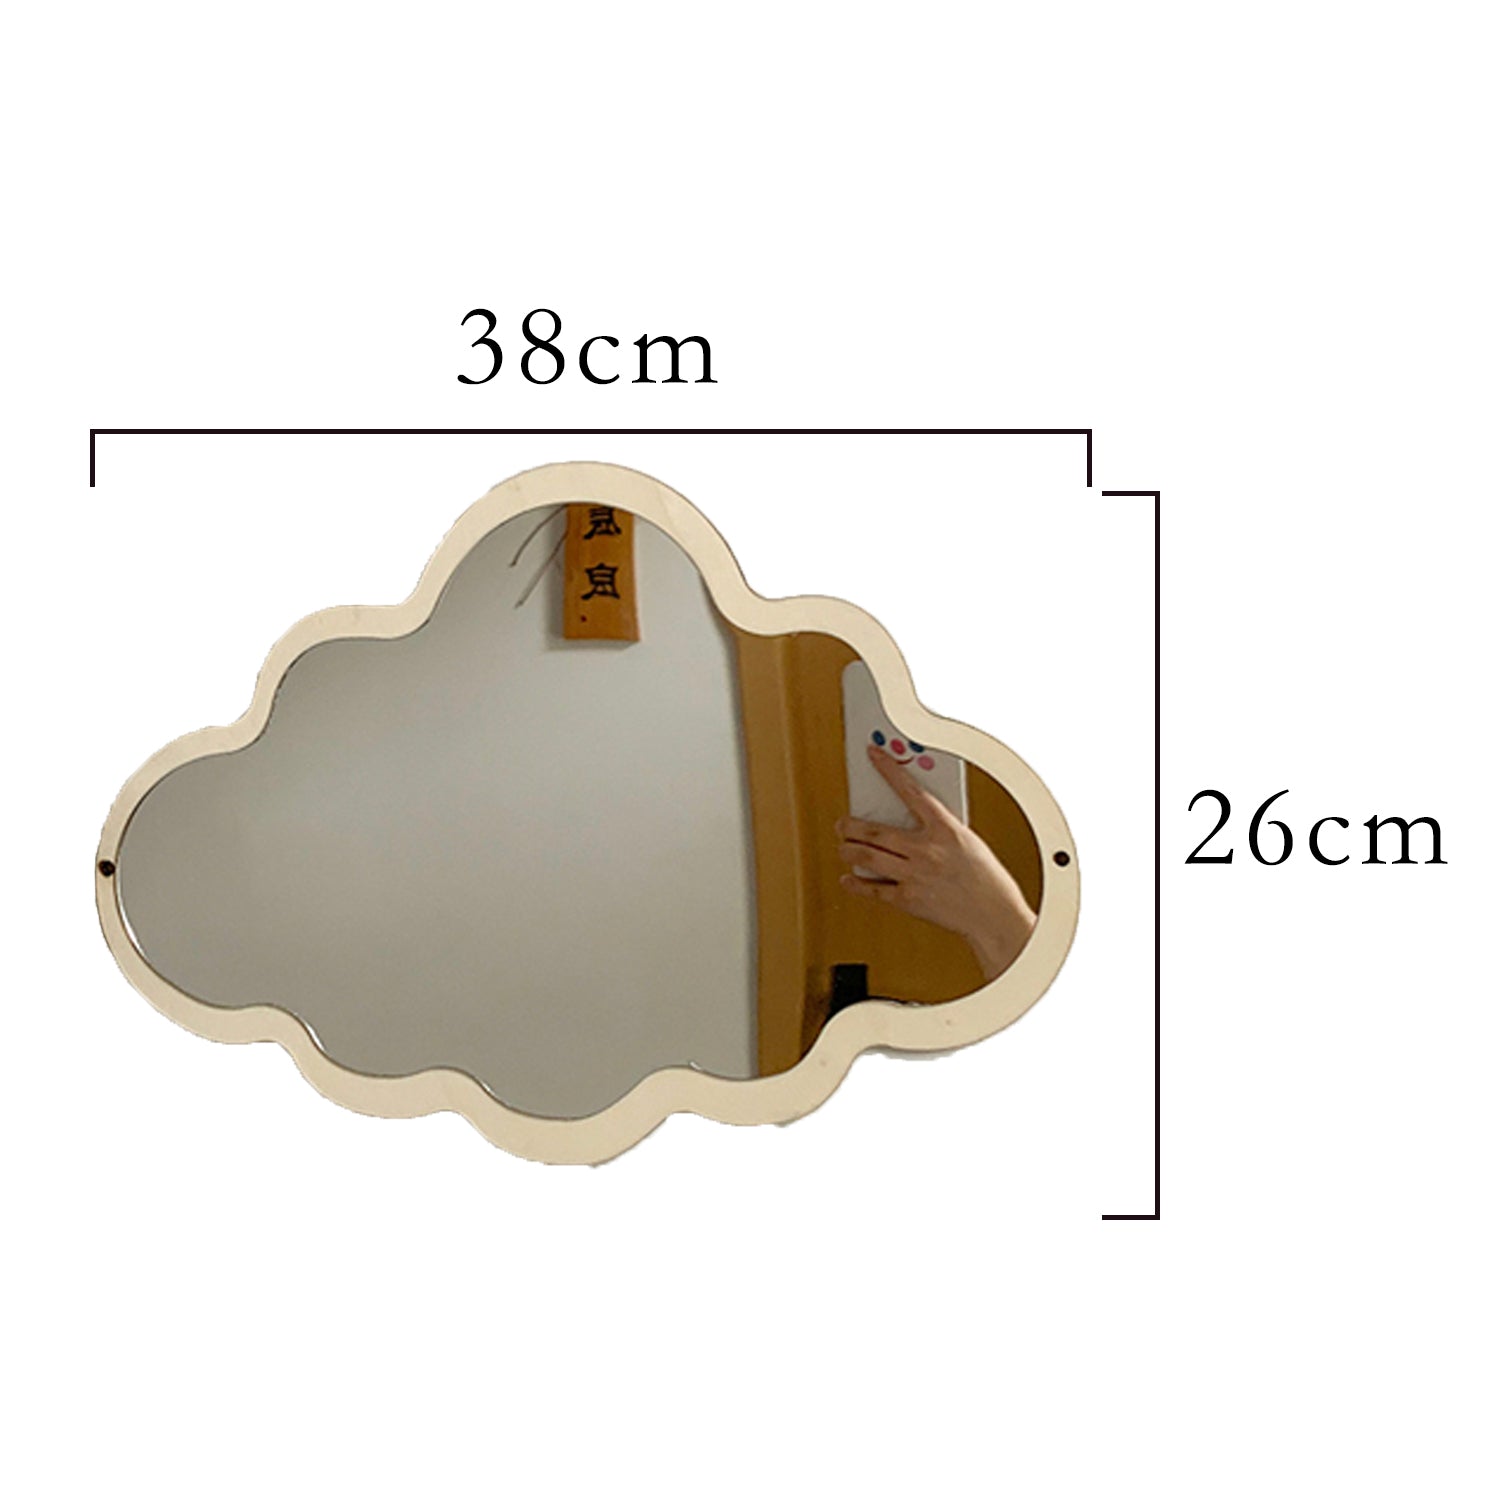 Cloud-shaped Mirror | Bedroom Wall Decor – the Peachy Day